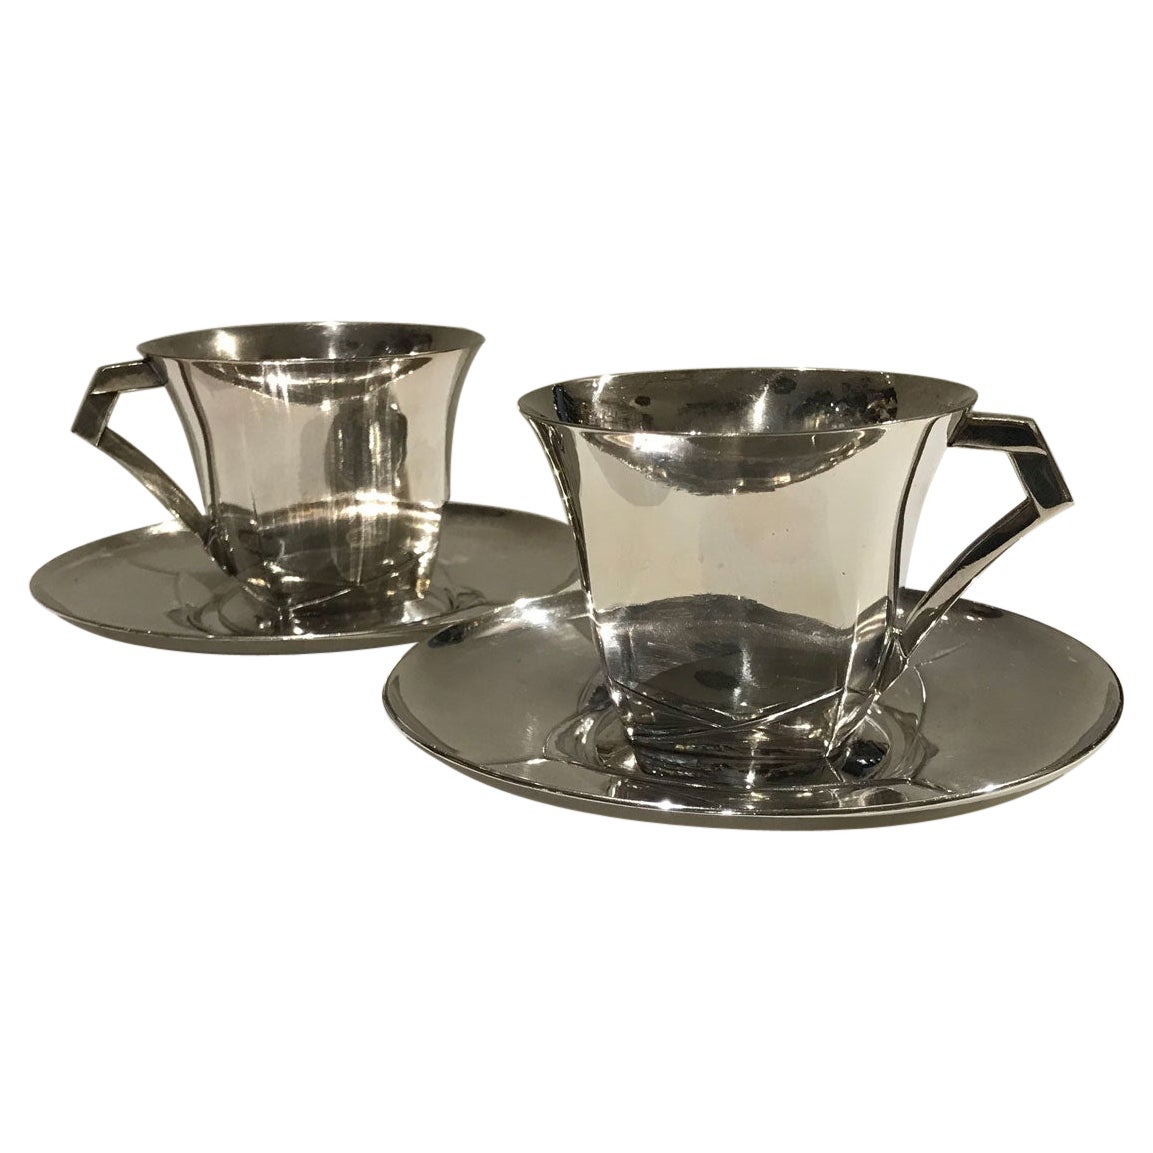 Pair of Art Deco Tea Cups with Saucers by Sue & Mare for Gallia, Christofle